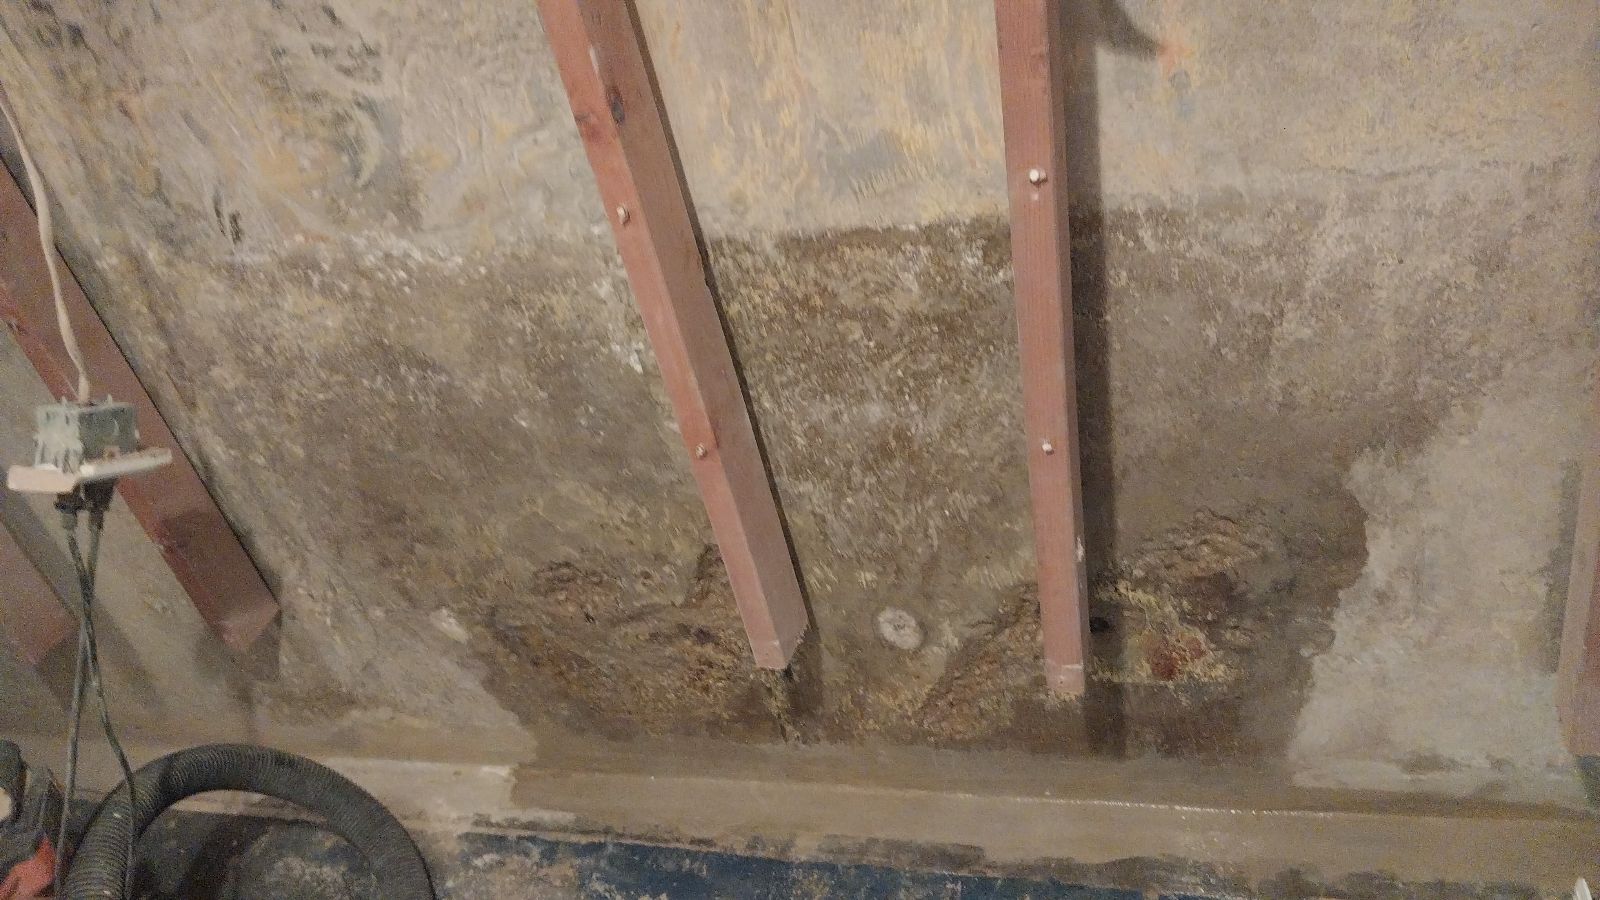 Water Damage Restoration Contractors in Douglaston Little Neck, NY - A Water Damaged Basement Wall with the Sheetrock Cut Back Showing the Waterline from a Flood with Mold and Mildew Growing on the Sheetrock on the Other Side and Studs